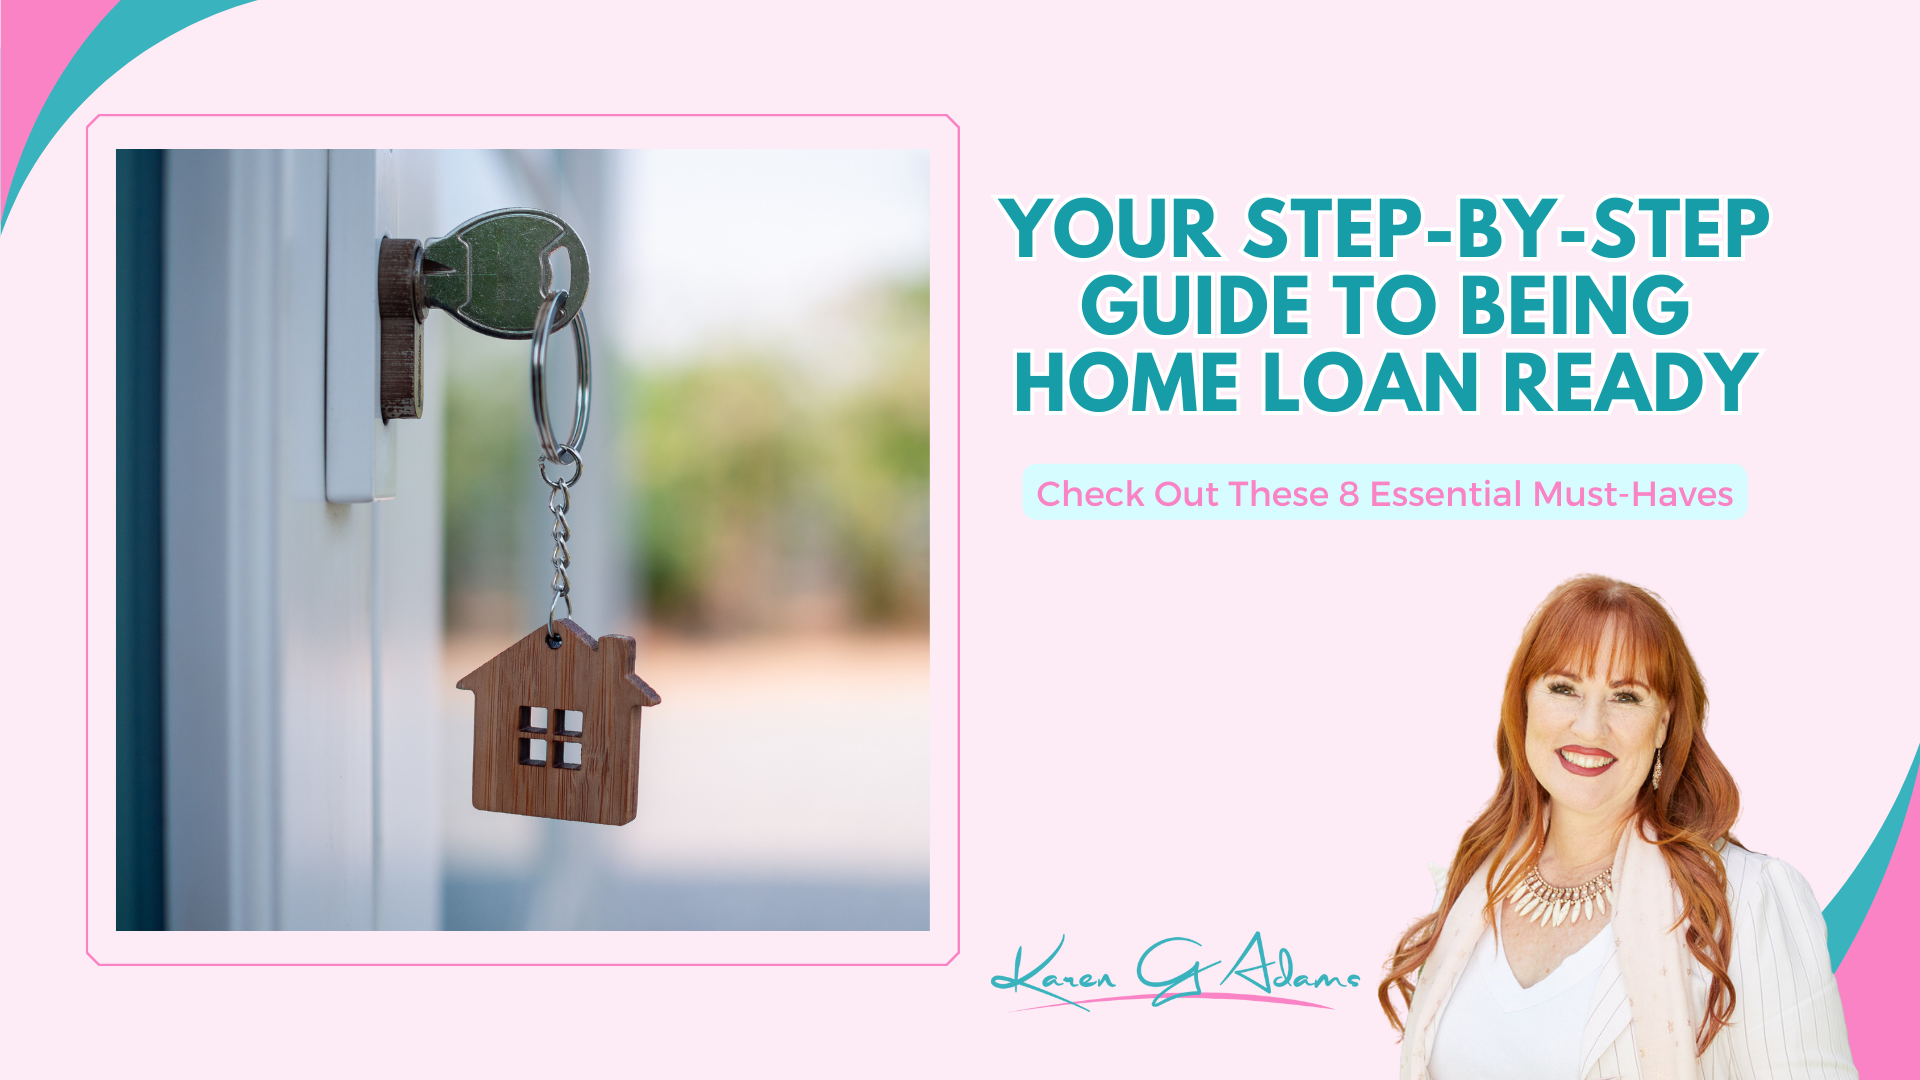 Your Step-by-Step Guide to Being Home Loan Ready